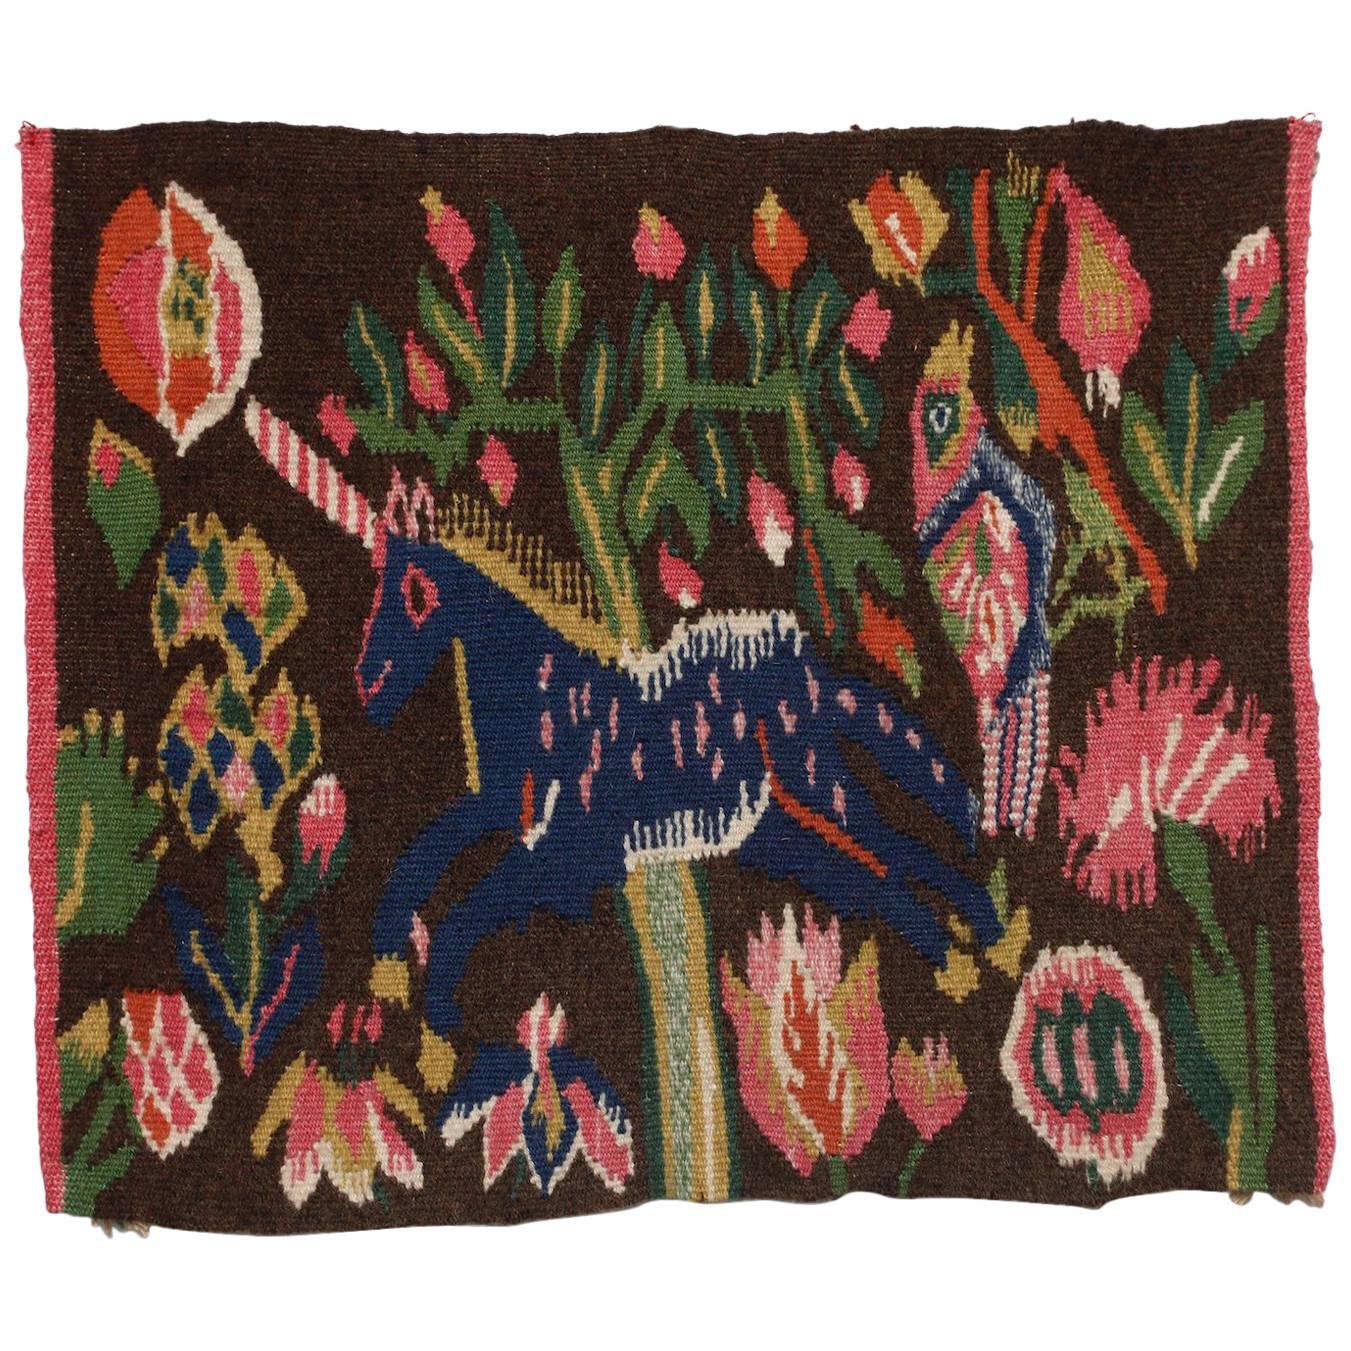 Small Handwoven Antique Tradtional Swedish Wool Tapestry with Unicorn Motive For Sale